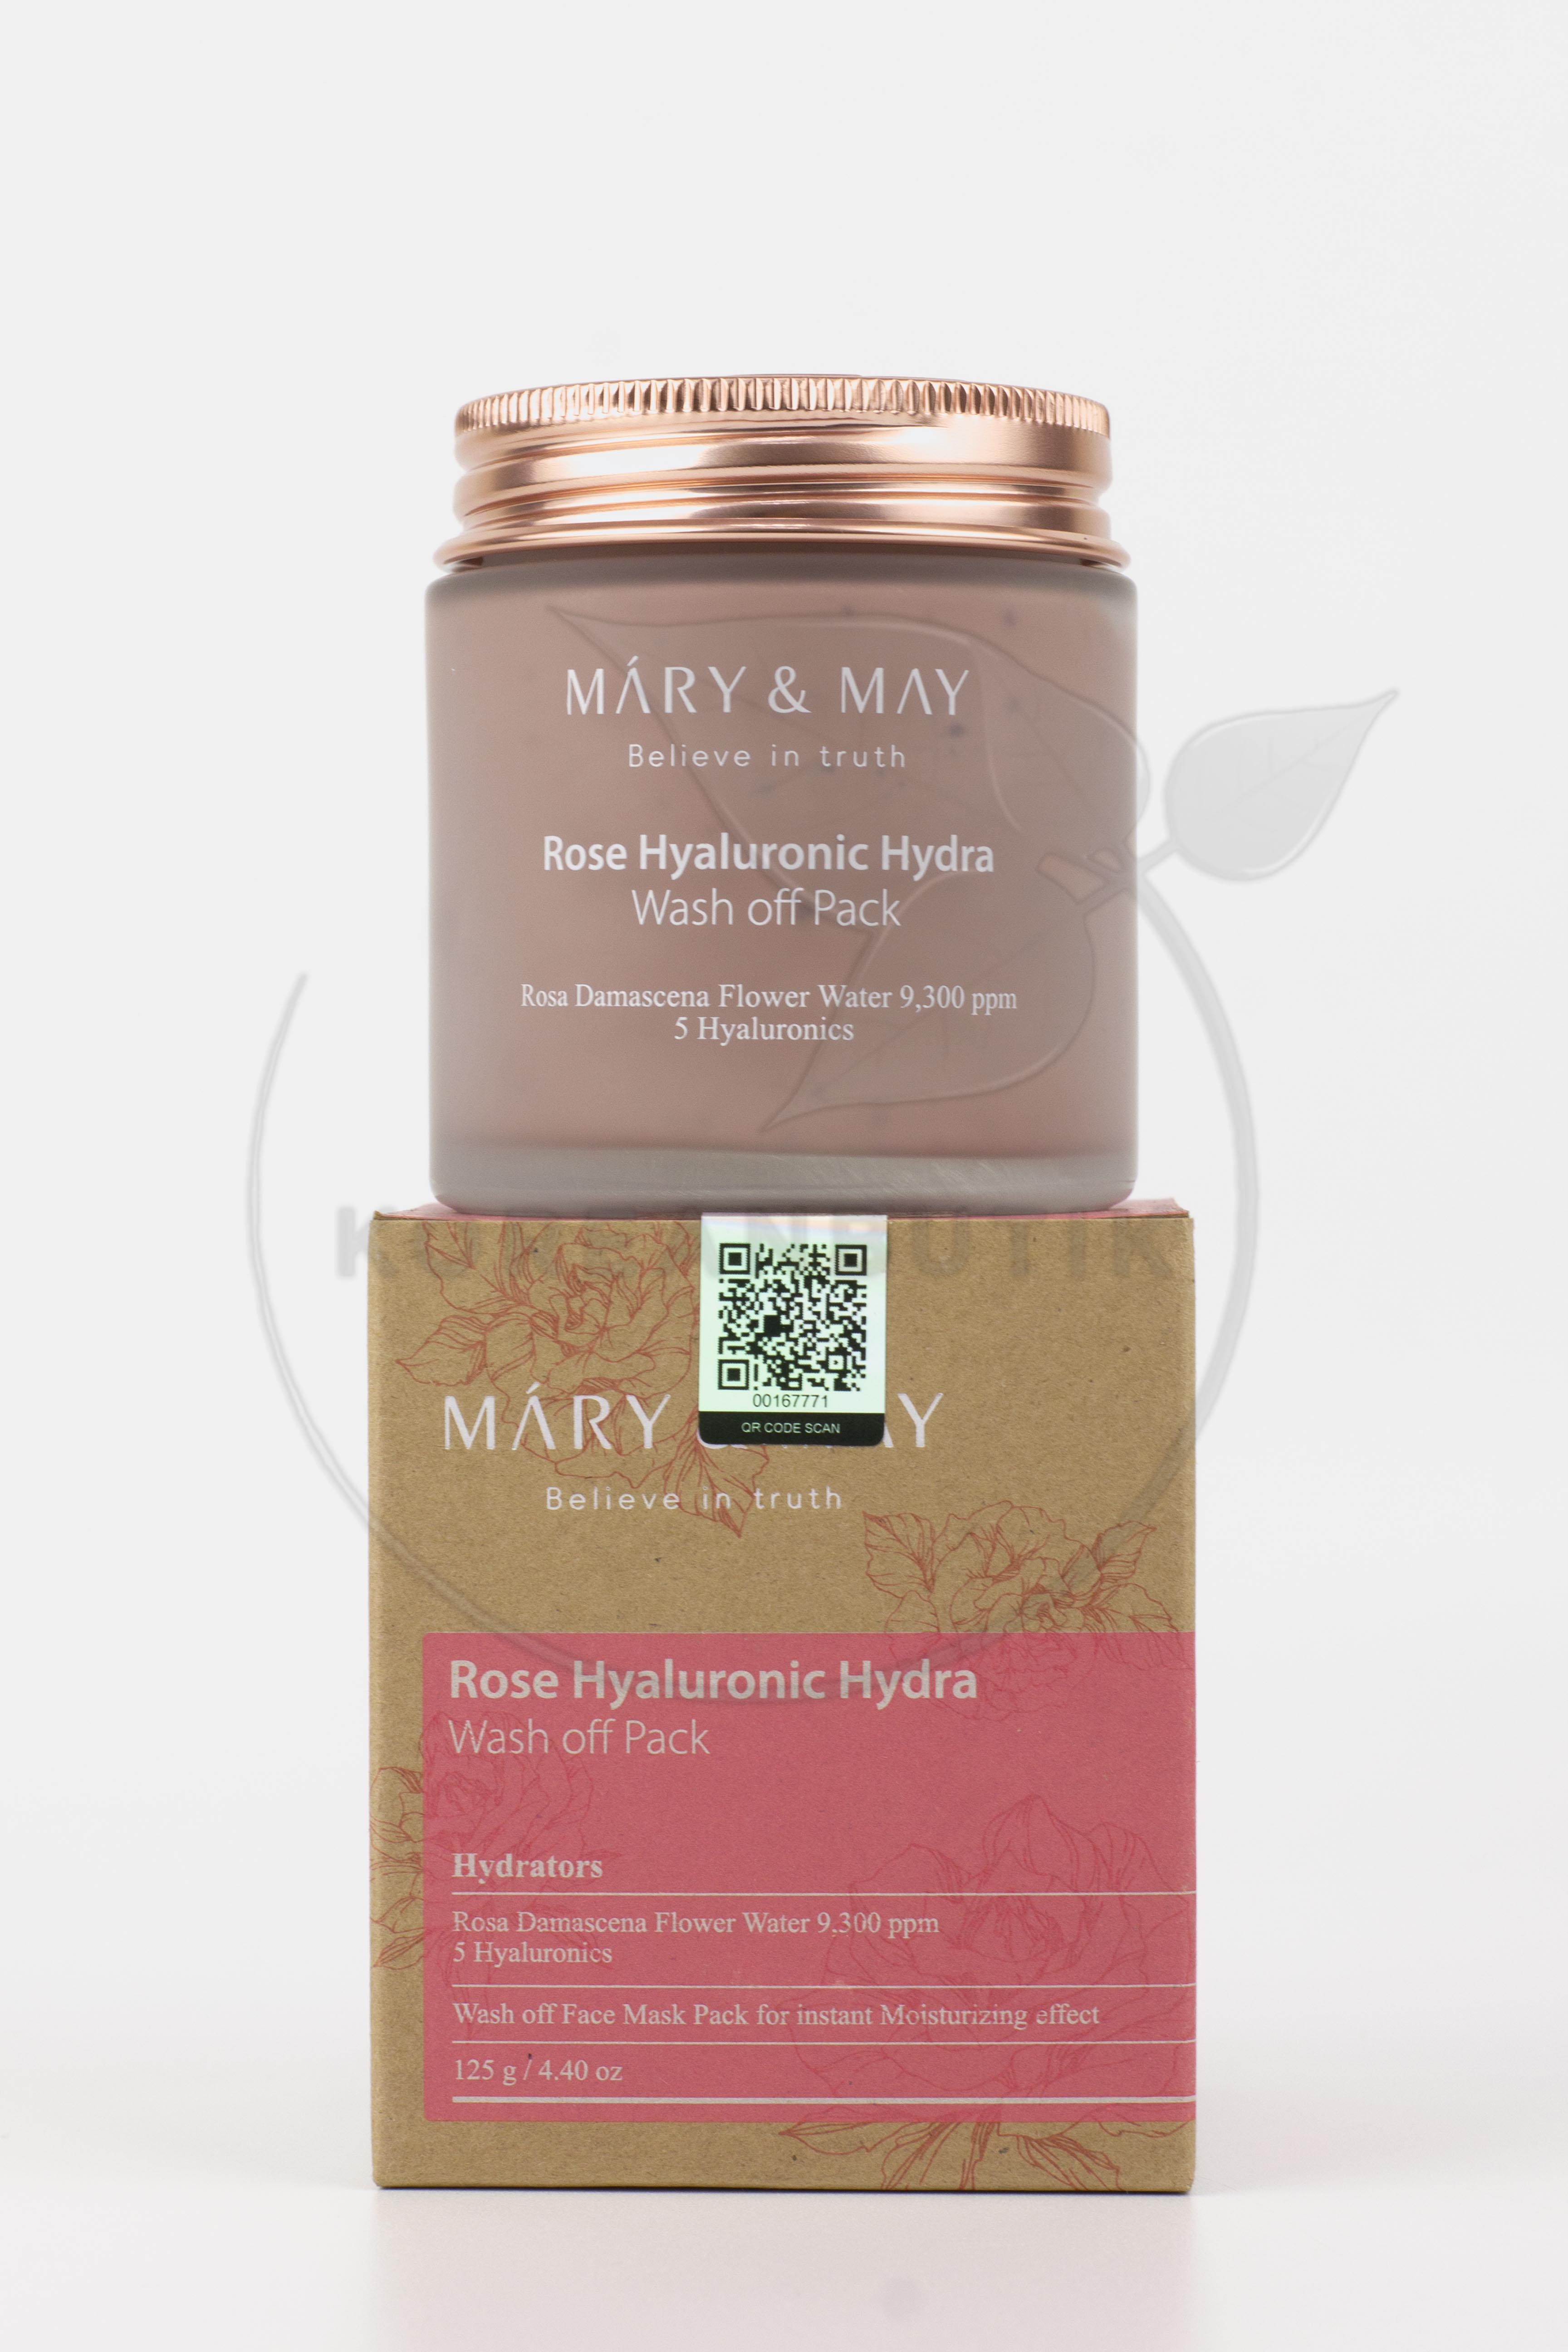  Mary&May Rose Hyaluronic Hydra Glow Wash Off Pack 125g 